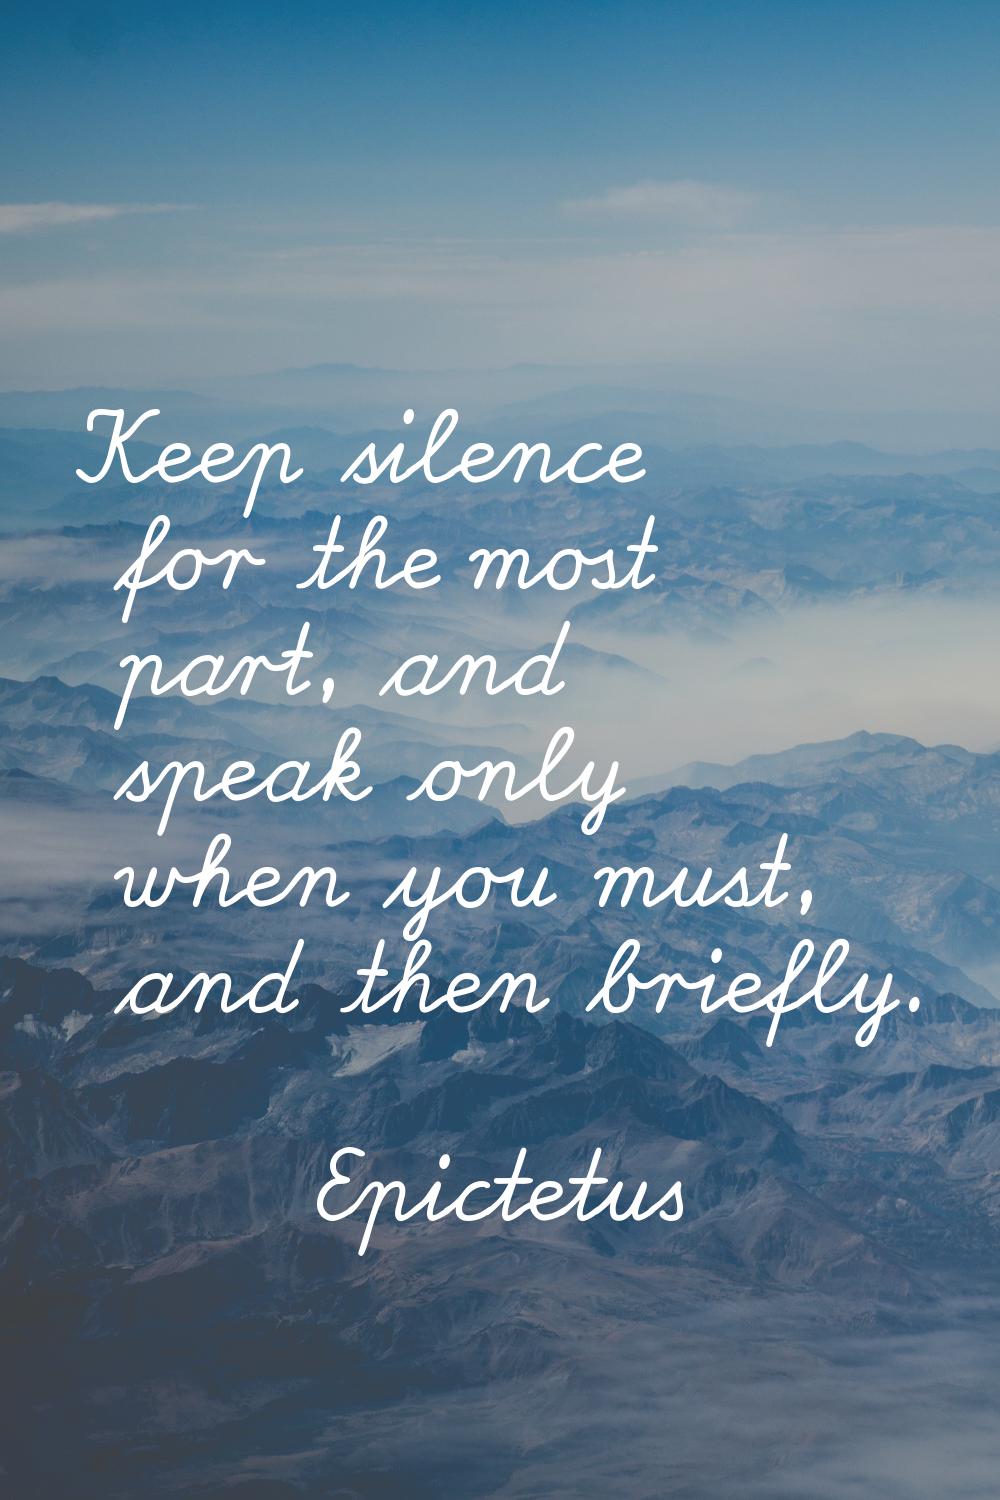 Keep silence for the most part, and speak only when you must, and then briefly.